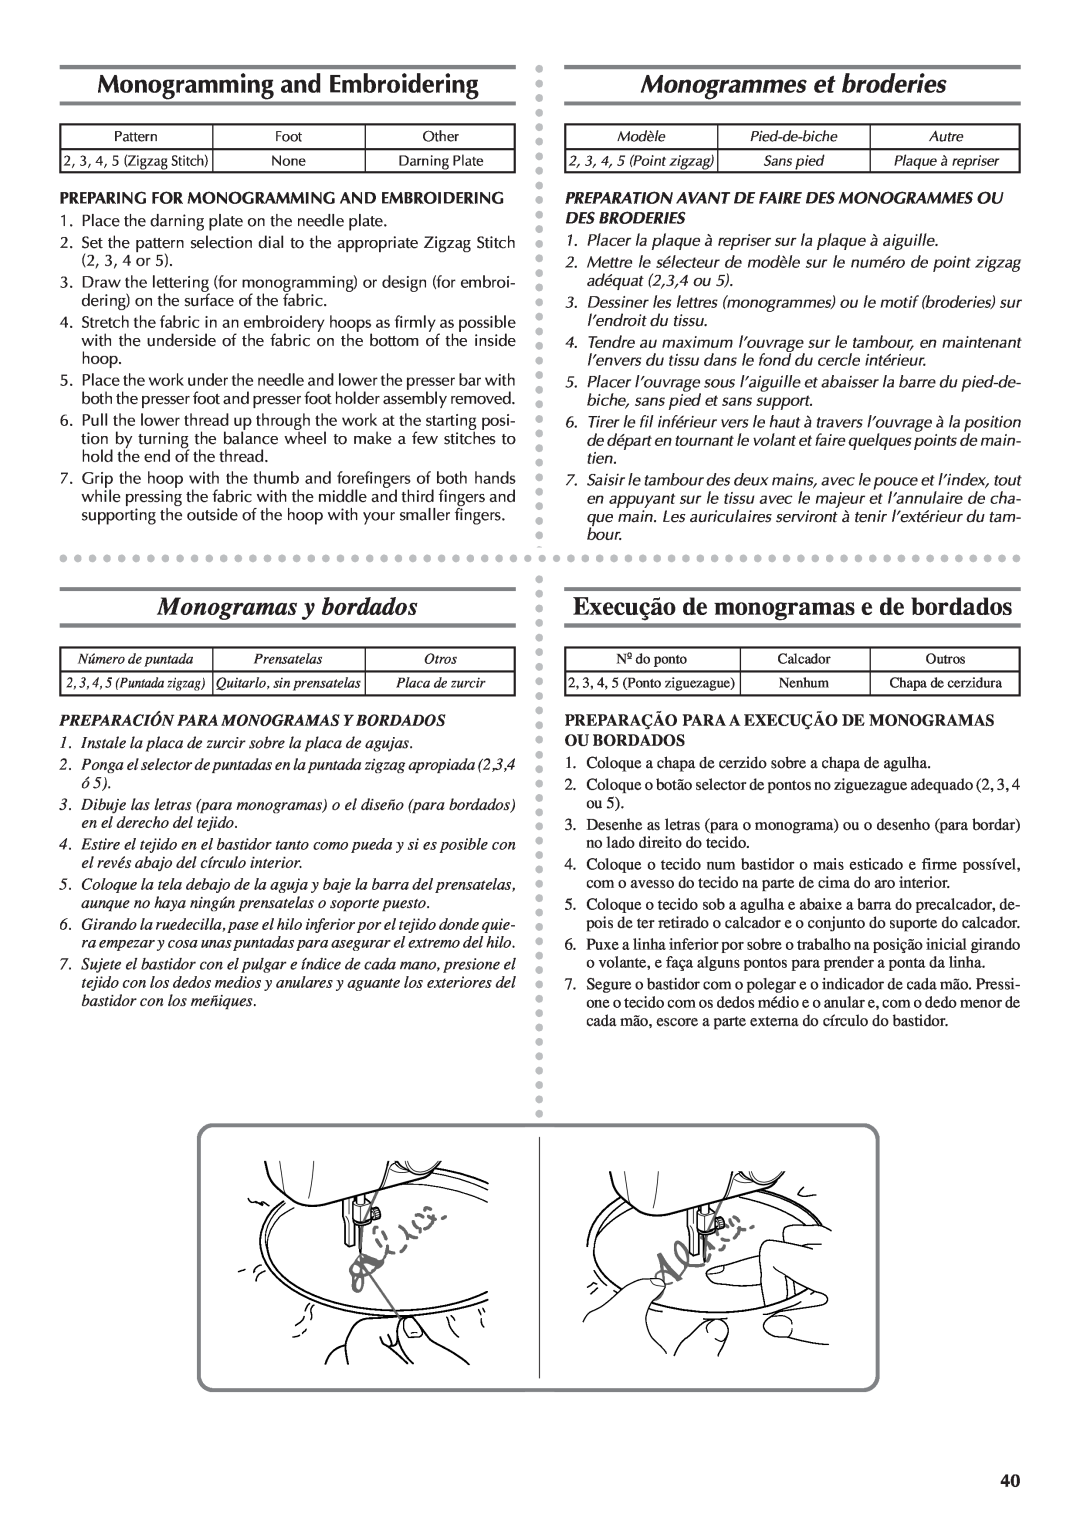 Brother LS 1520 instruction manual Monogramming and Embroidering, Monogrammes et broderies, Monogramas y bordados 